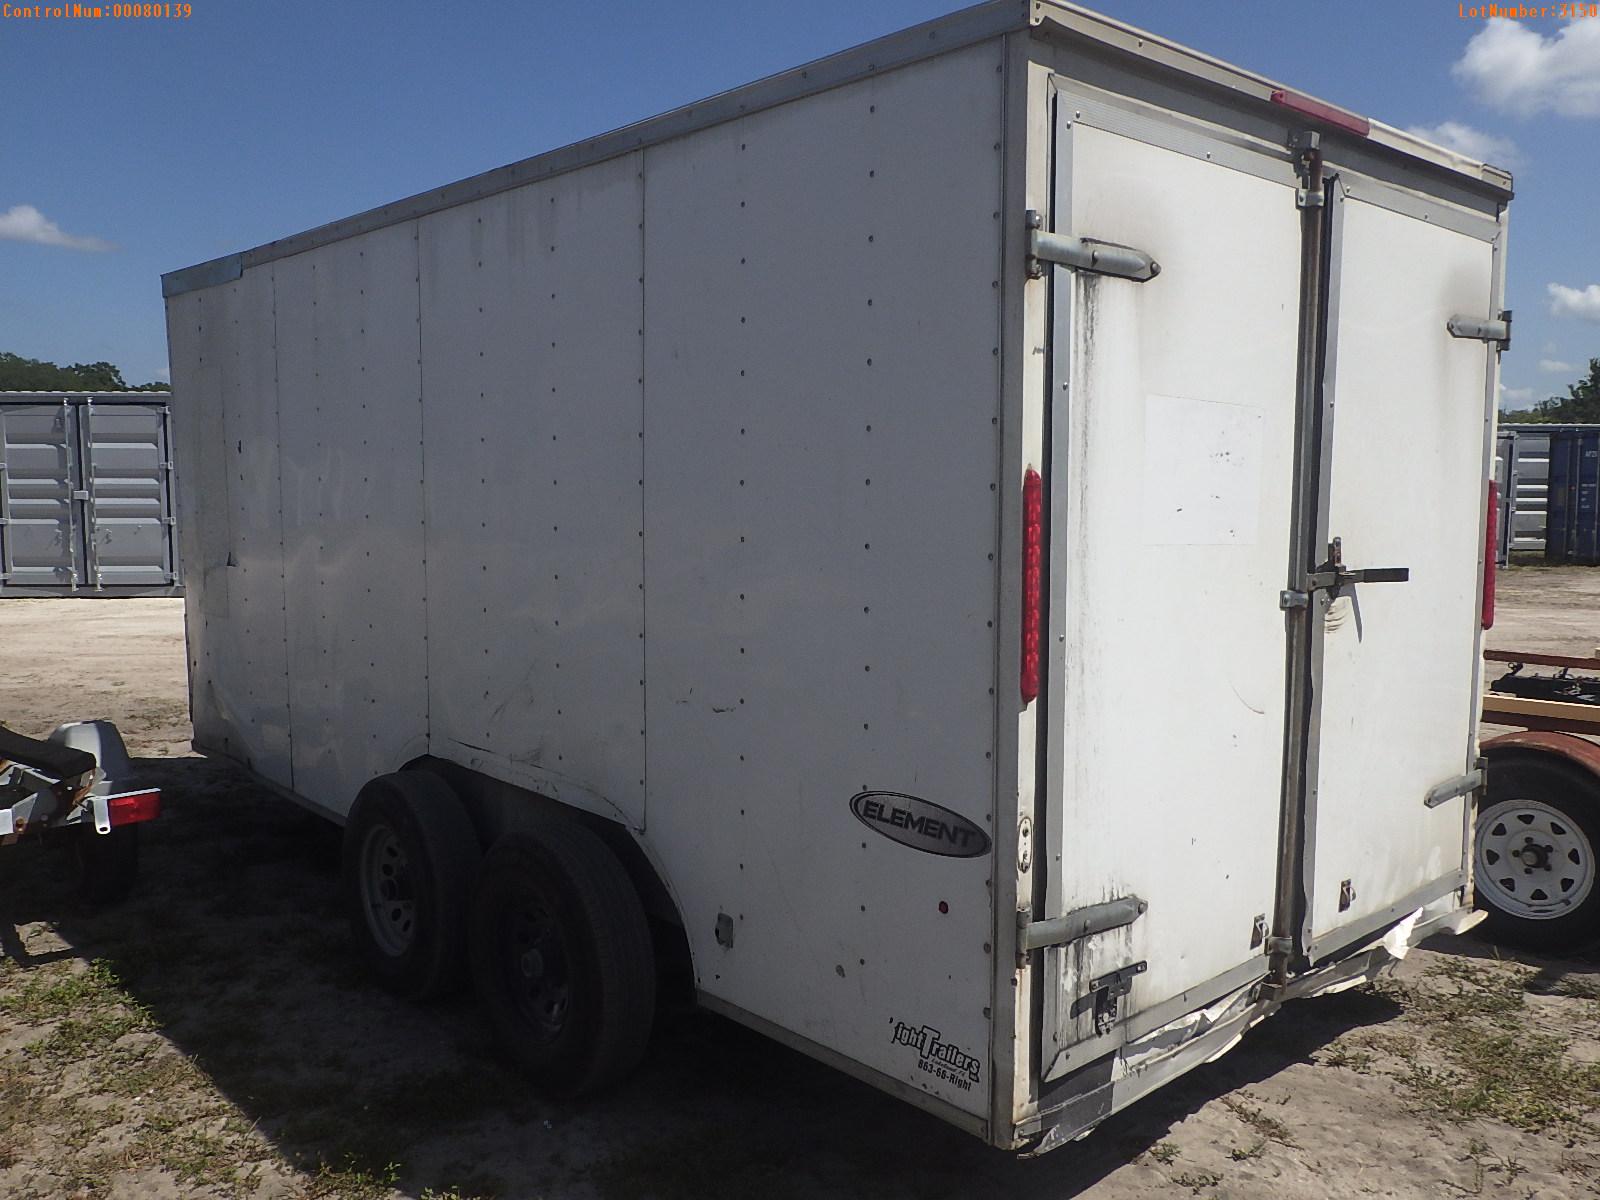 5-03150 (Trailers-Utility flatbed)  Seller:Private/Dealer 2018 LOOK PACE